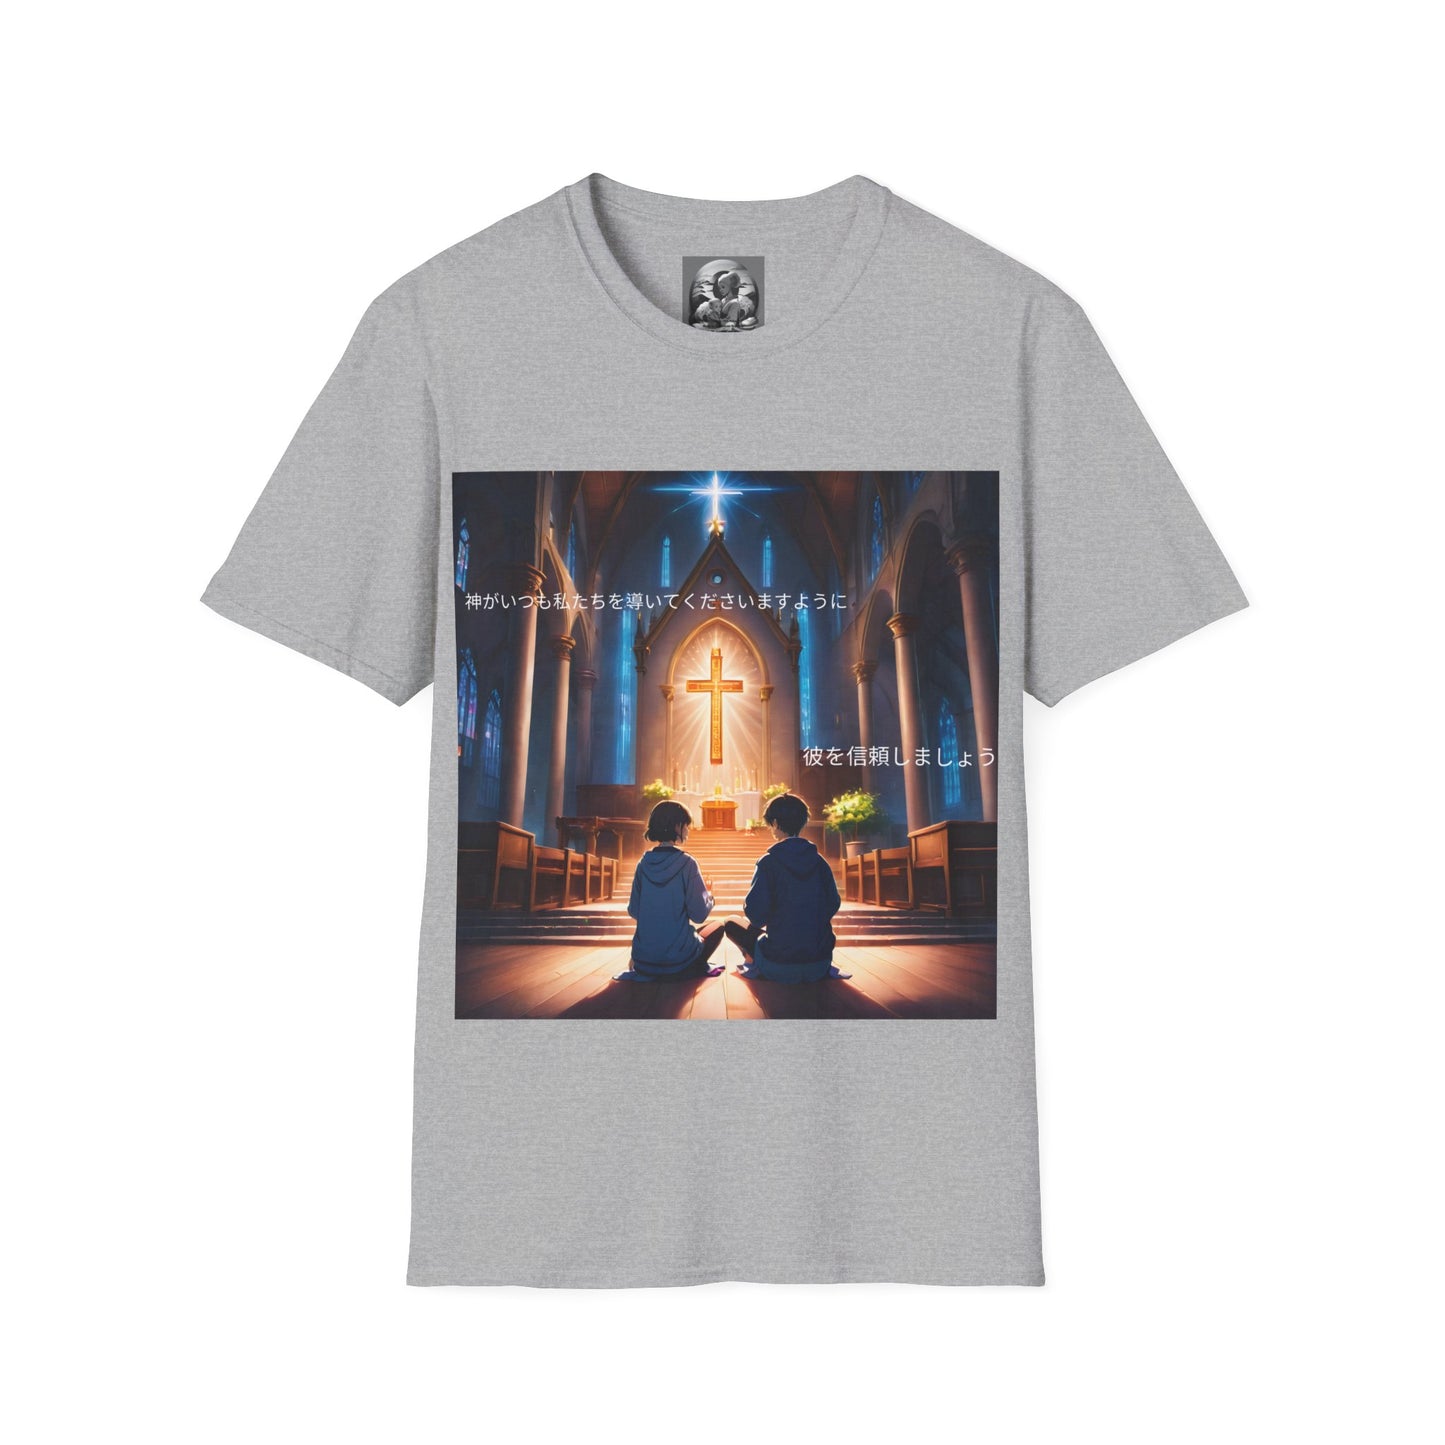 "In God we trust" Double Print Unisex Softstyle T-Shirt